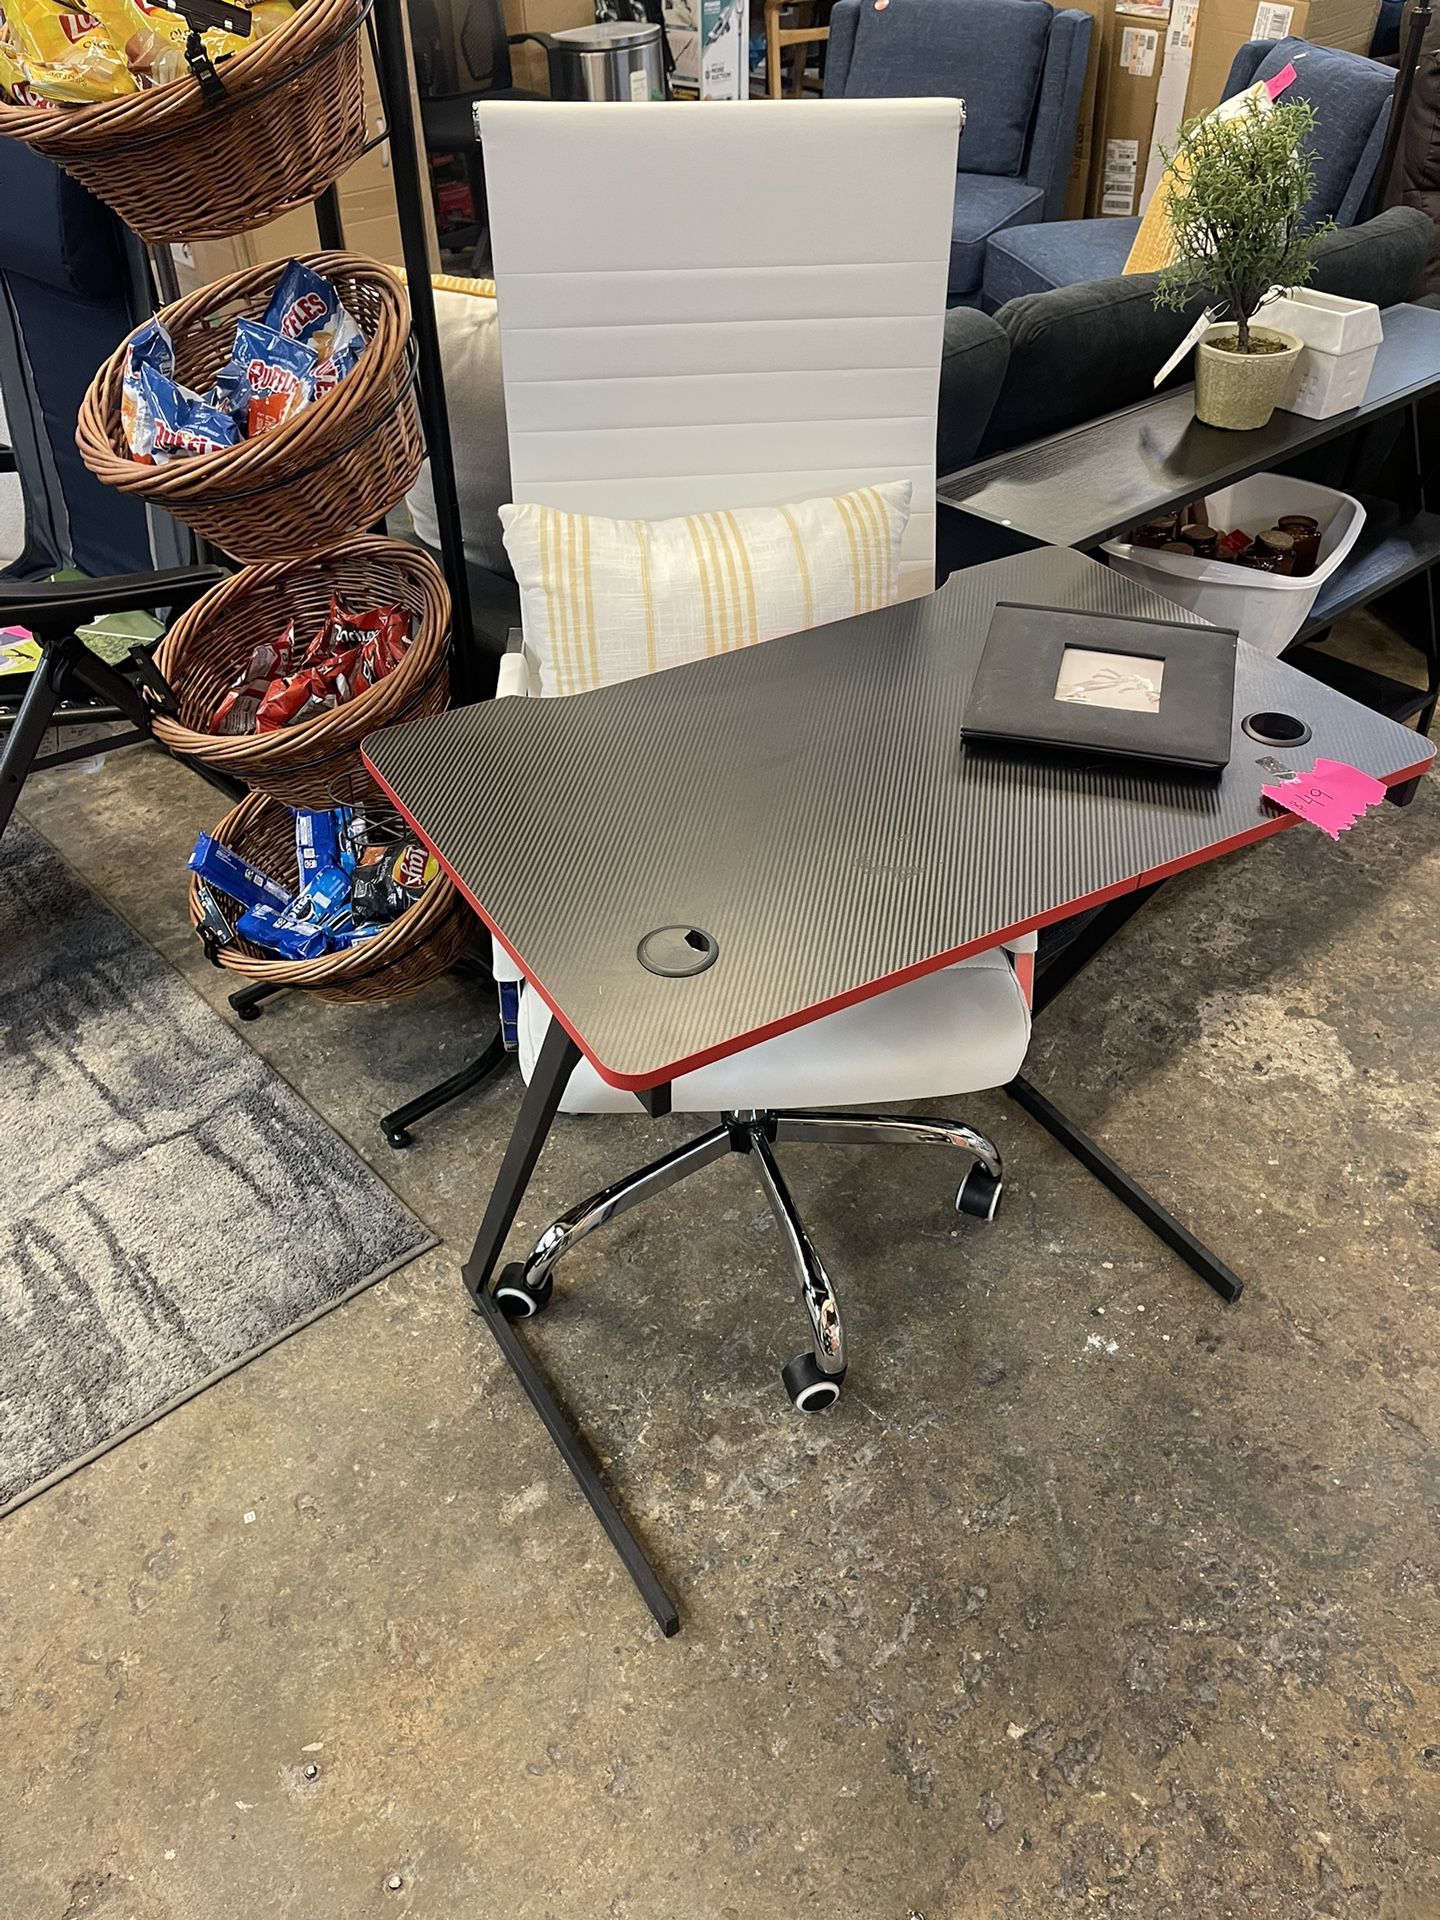 Small Gaming Desk $49 White Leather Desk Chair $69 Each 